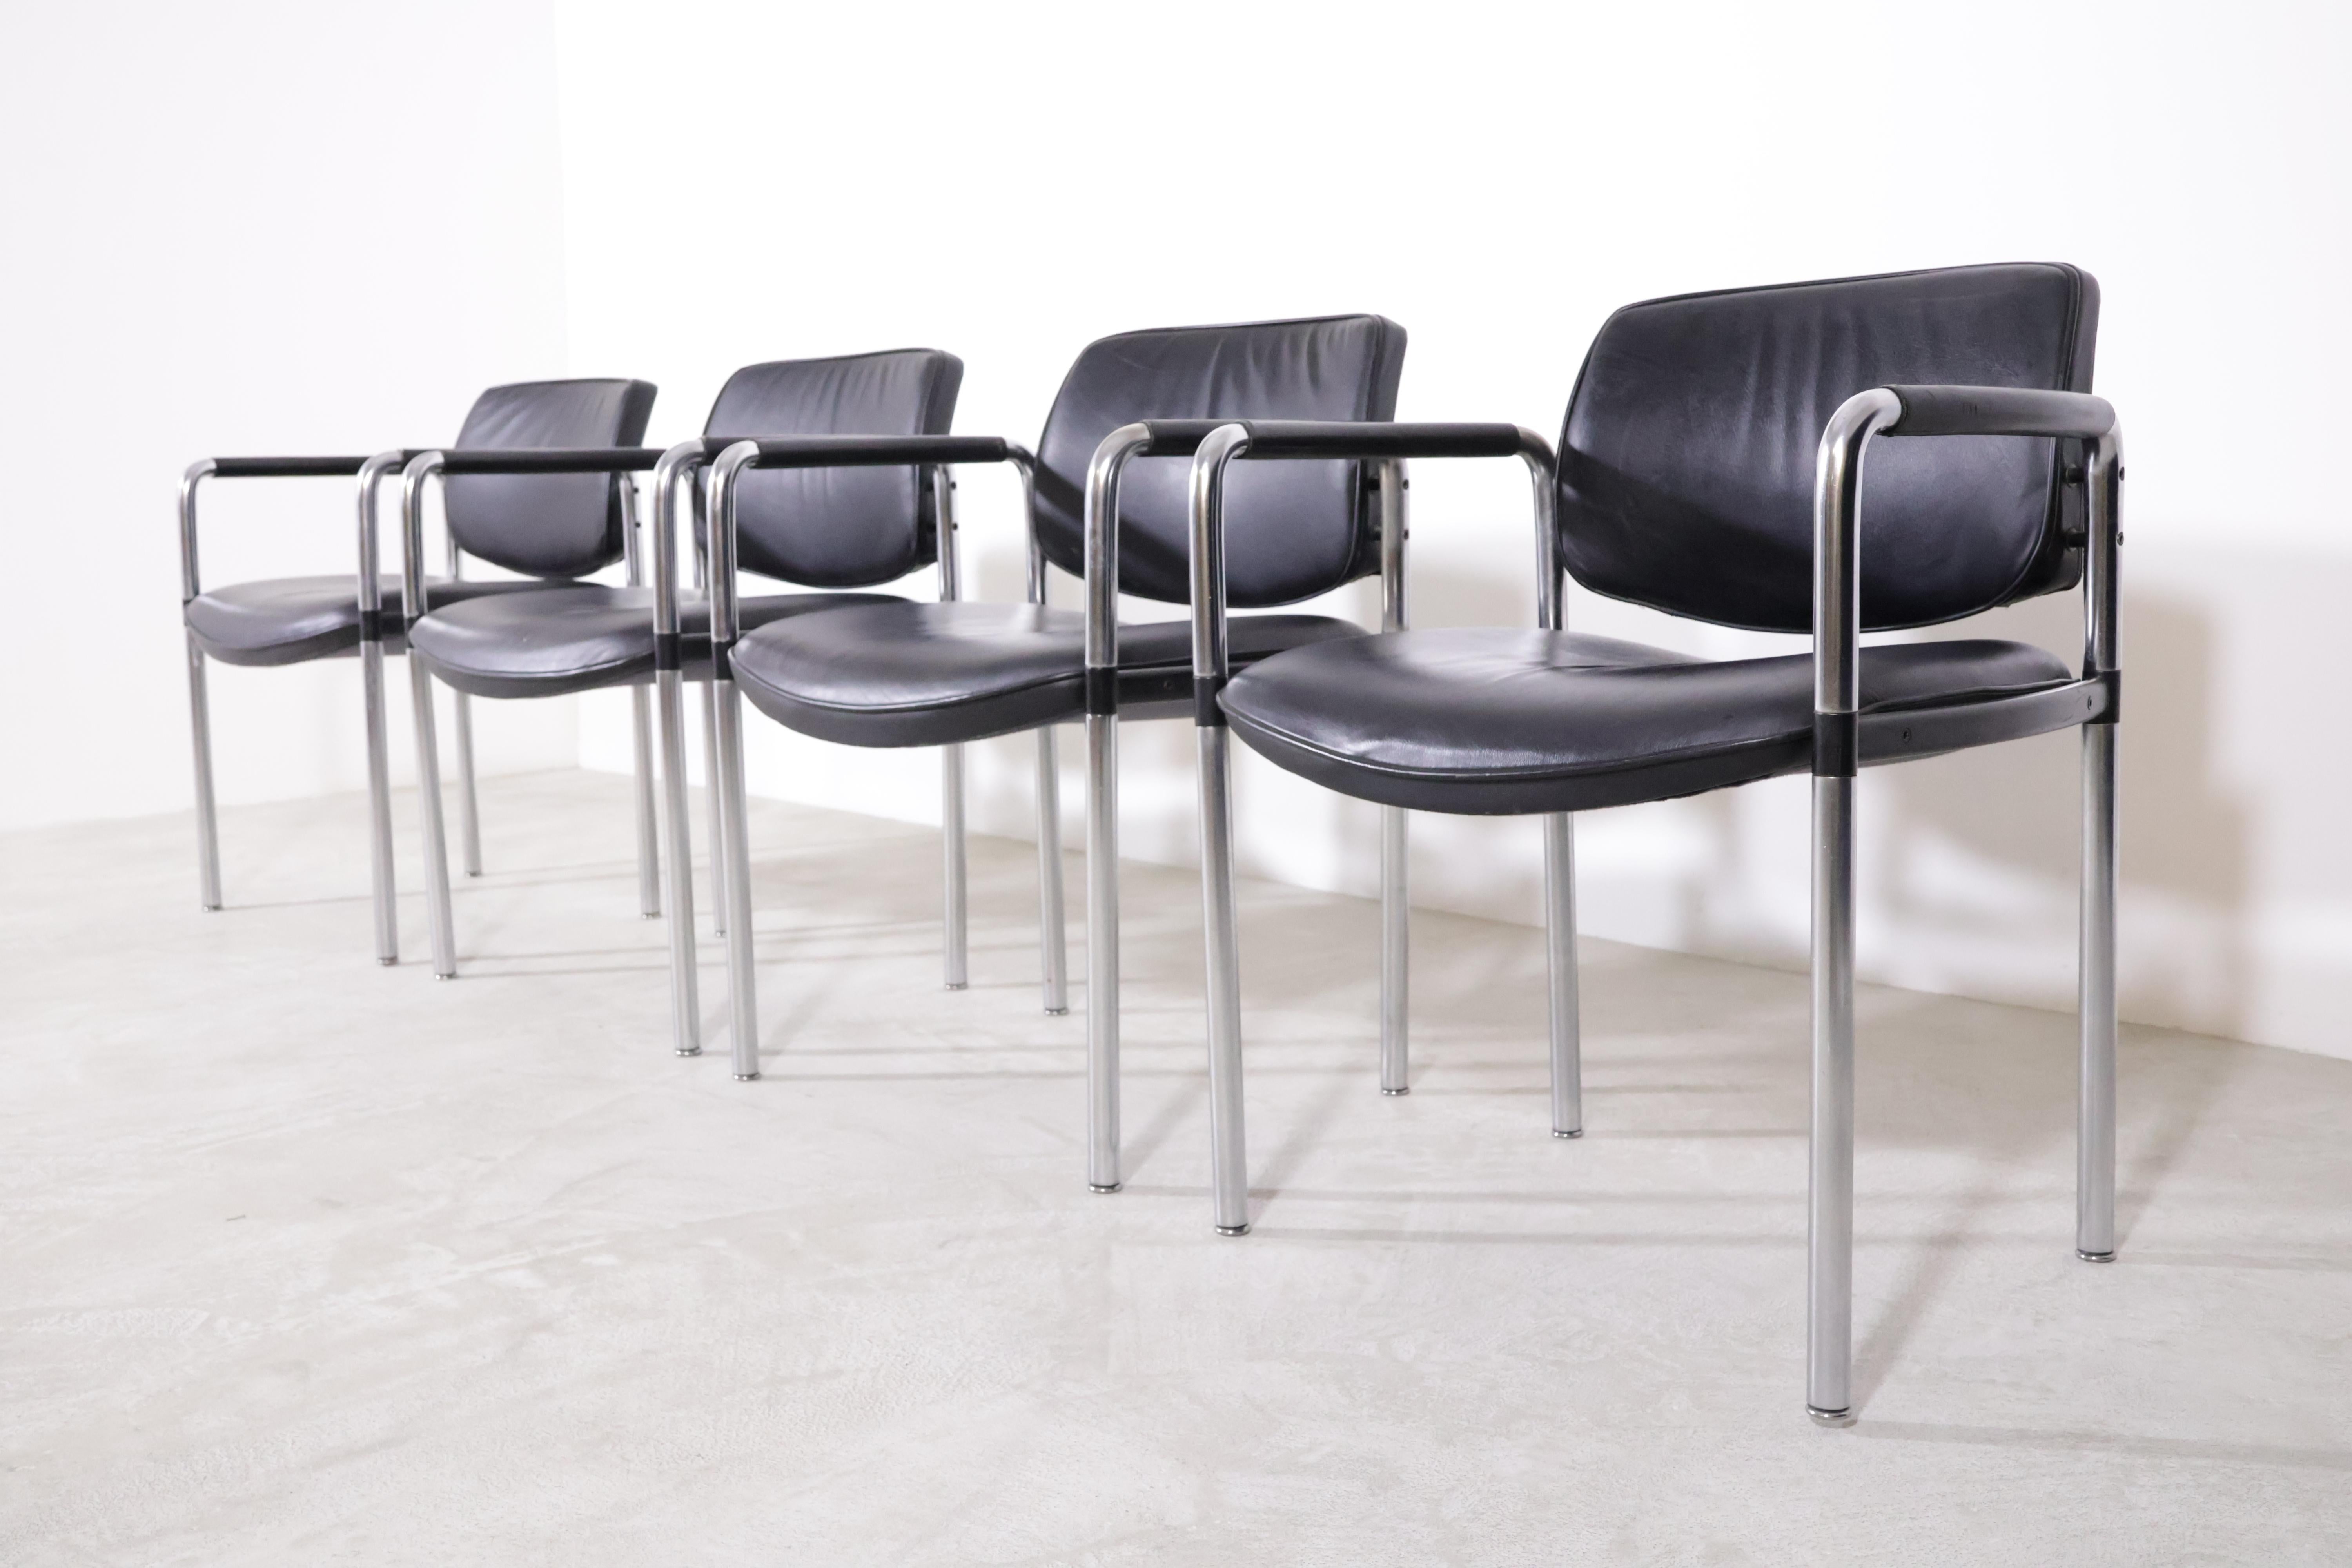 These conference chairs by Jorgen Kastholm for Kusch & Co are in great original condition!

The chair is a rare conference/dining chair that stands out due to its extremely high quality and is also unique in its design. Both the frame and the